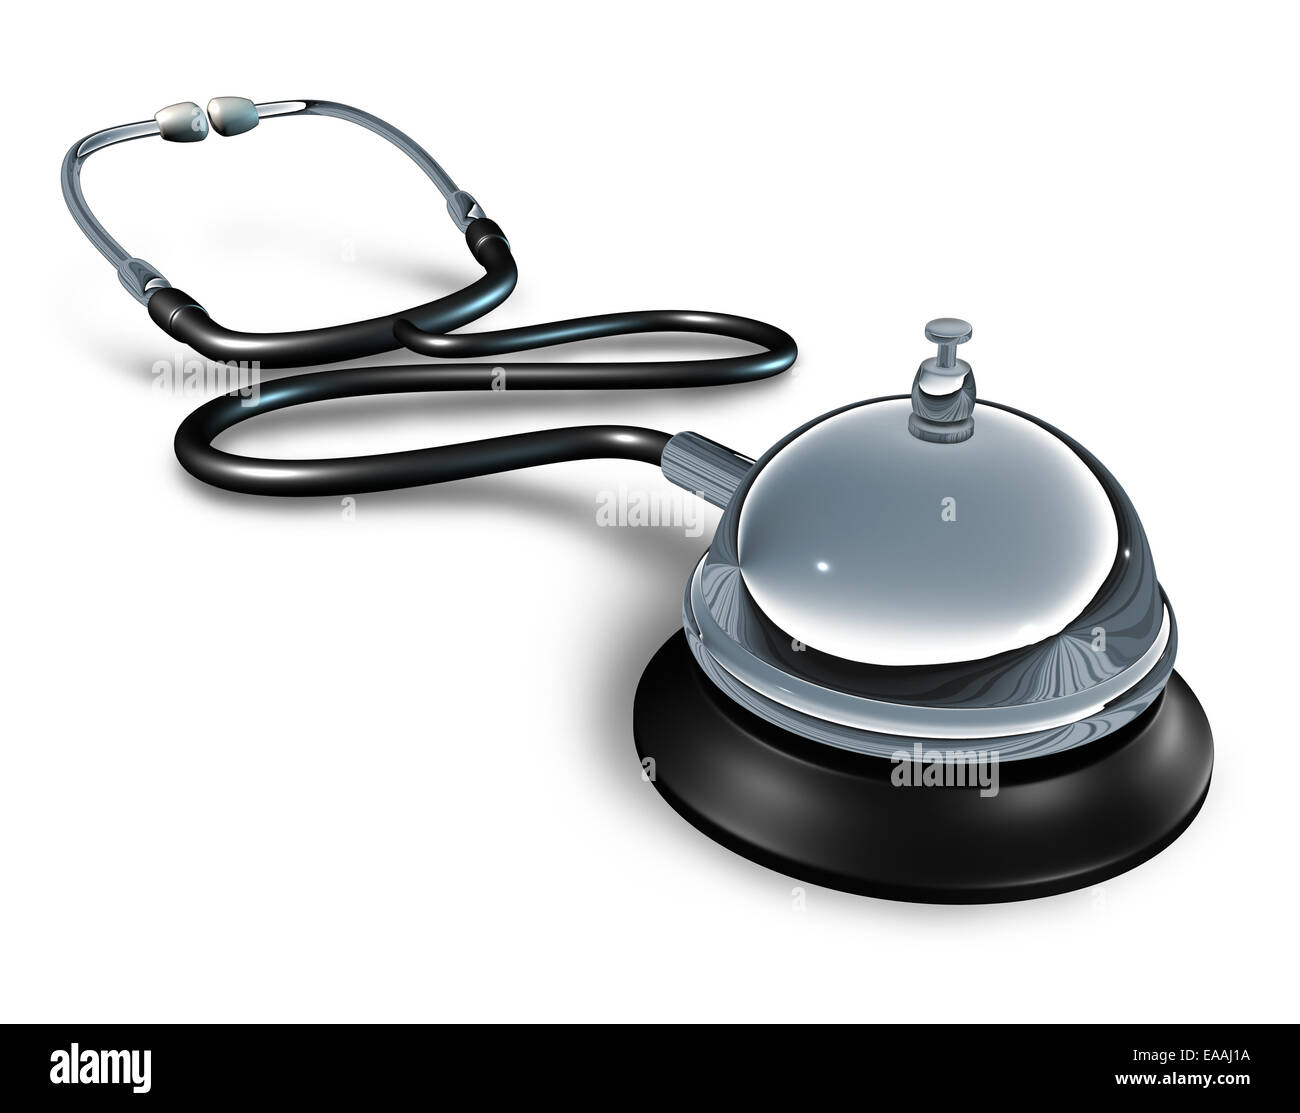 Medical services and private medicine concept as a doctor stethoscope with a service bell as a symbol of quality hospital patient health care treatment service. Stock Photo